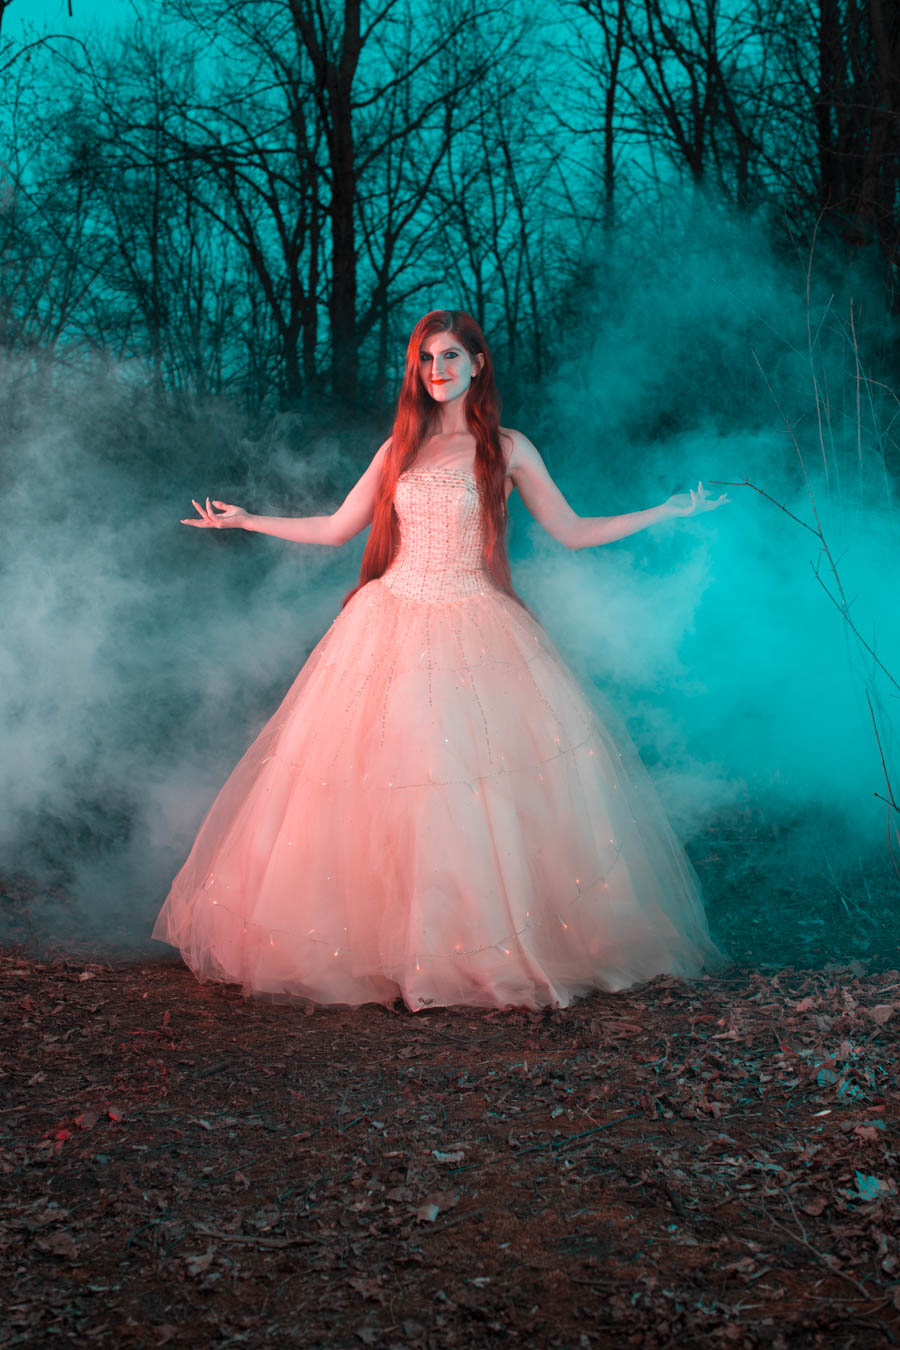 Model Dreamera Marie poses in the woods with a smoky background
